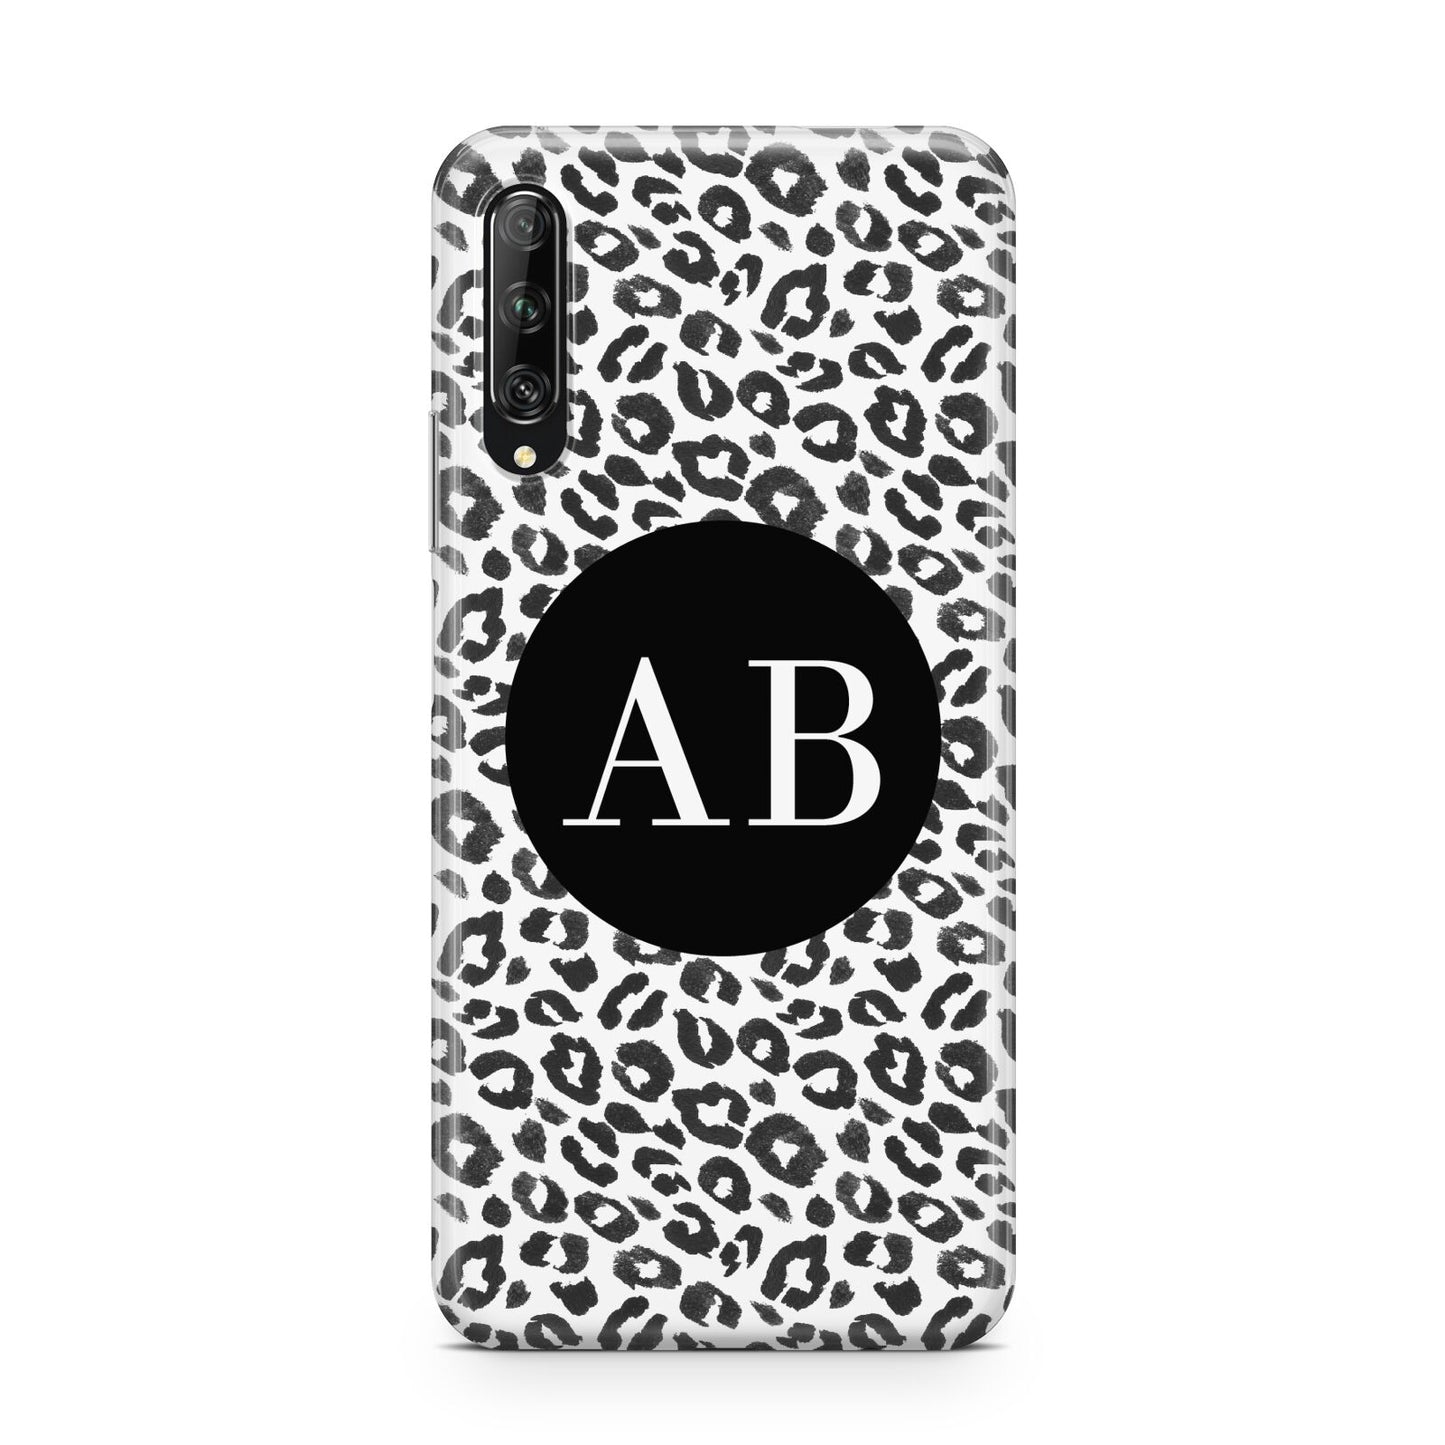 Leopard Print Black and White Huawei P Smart Pro 2019